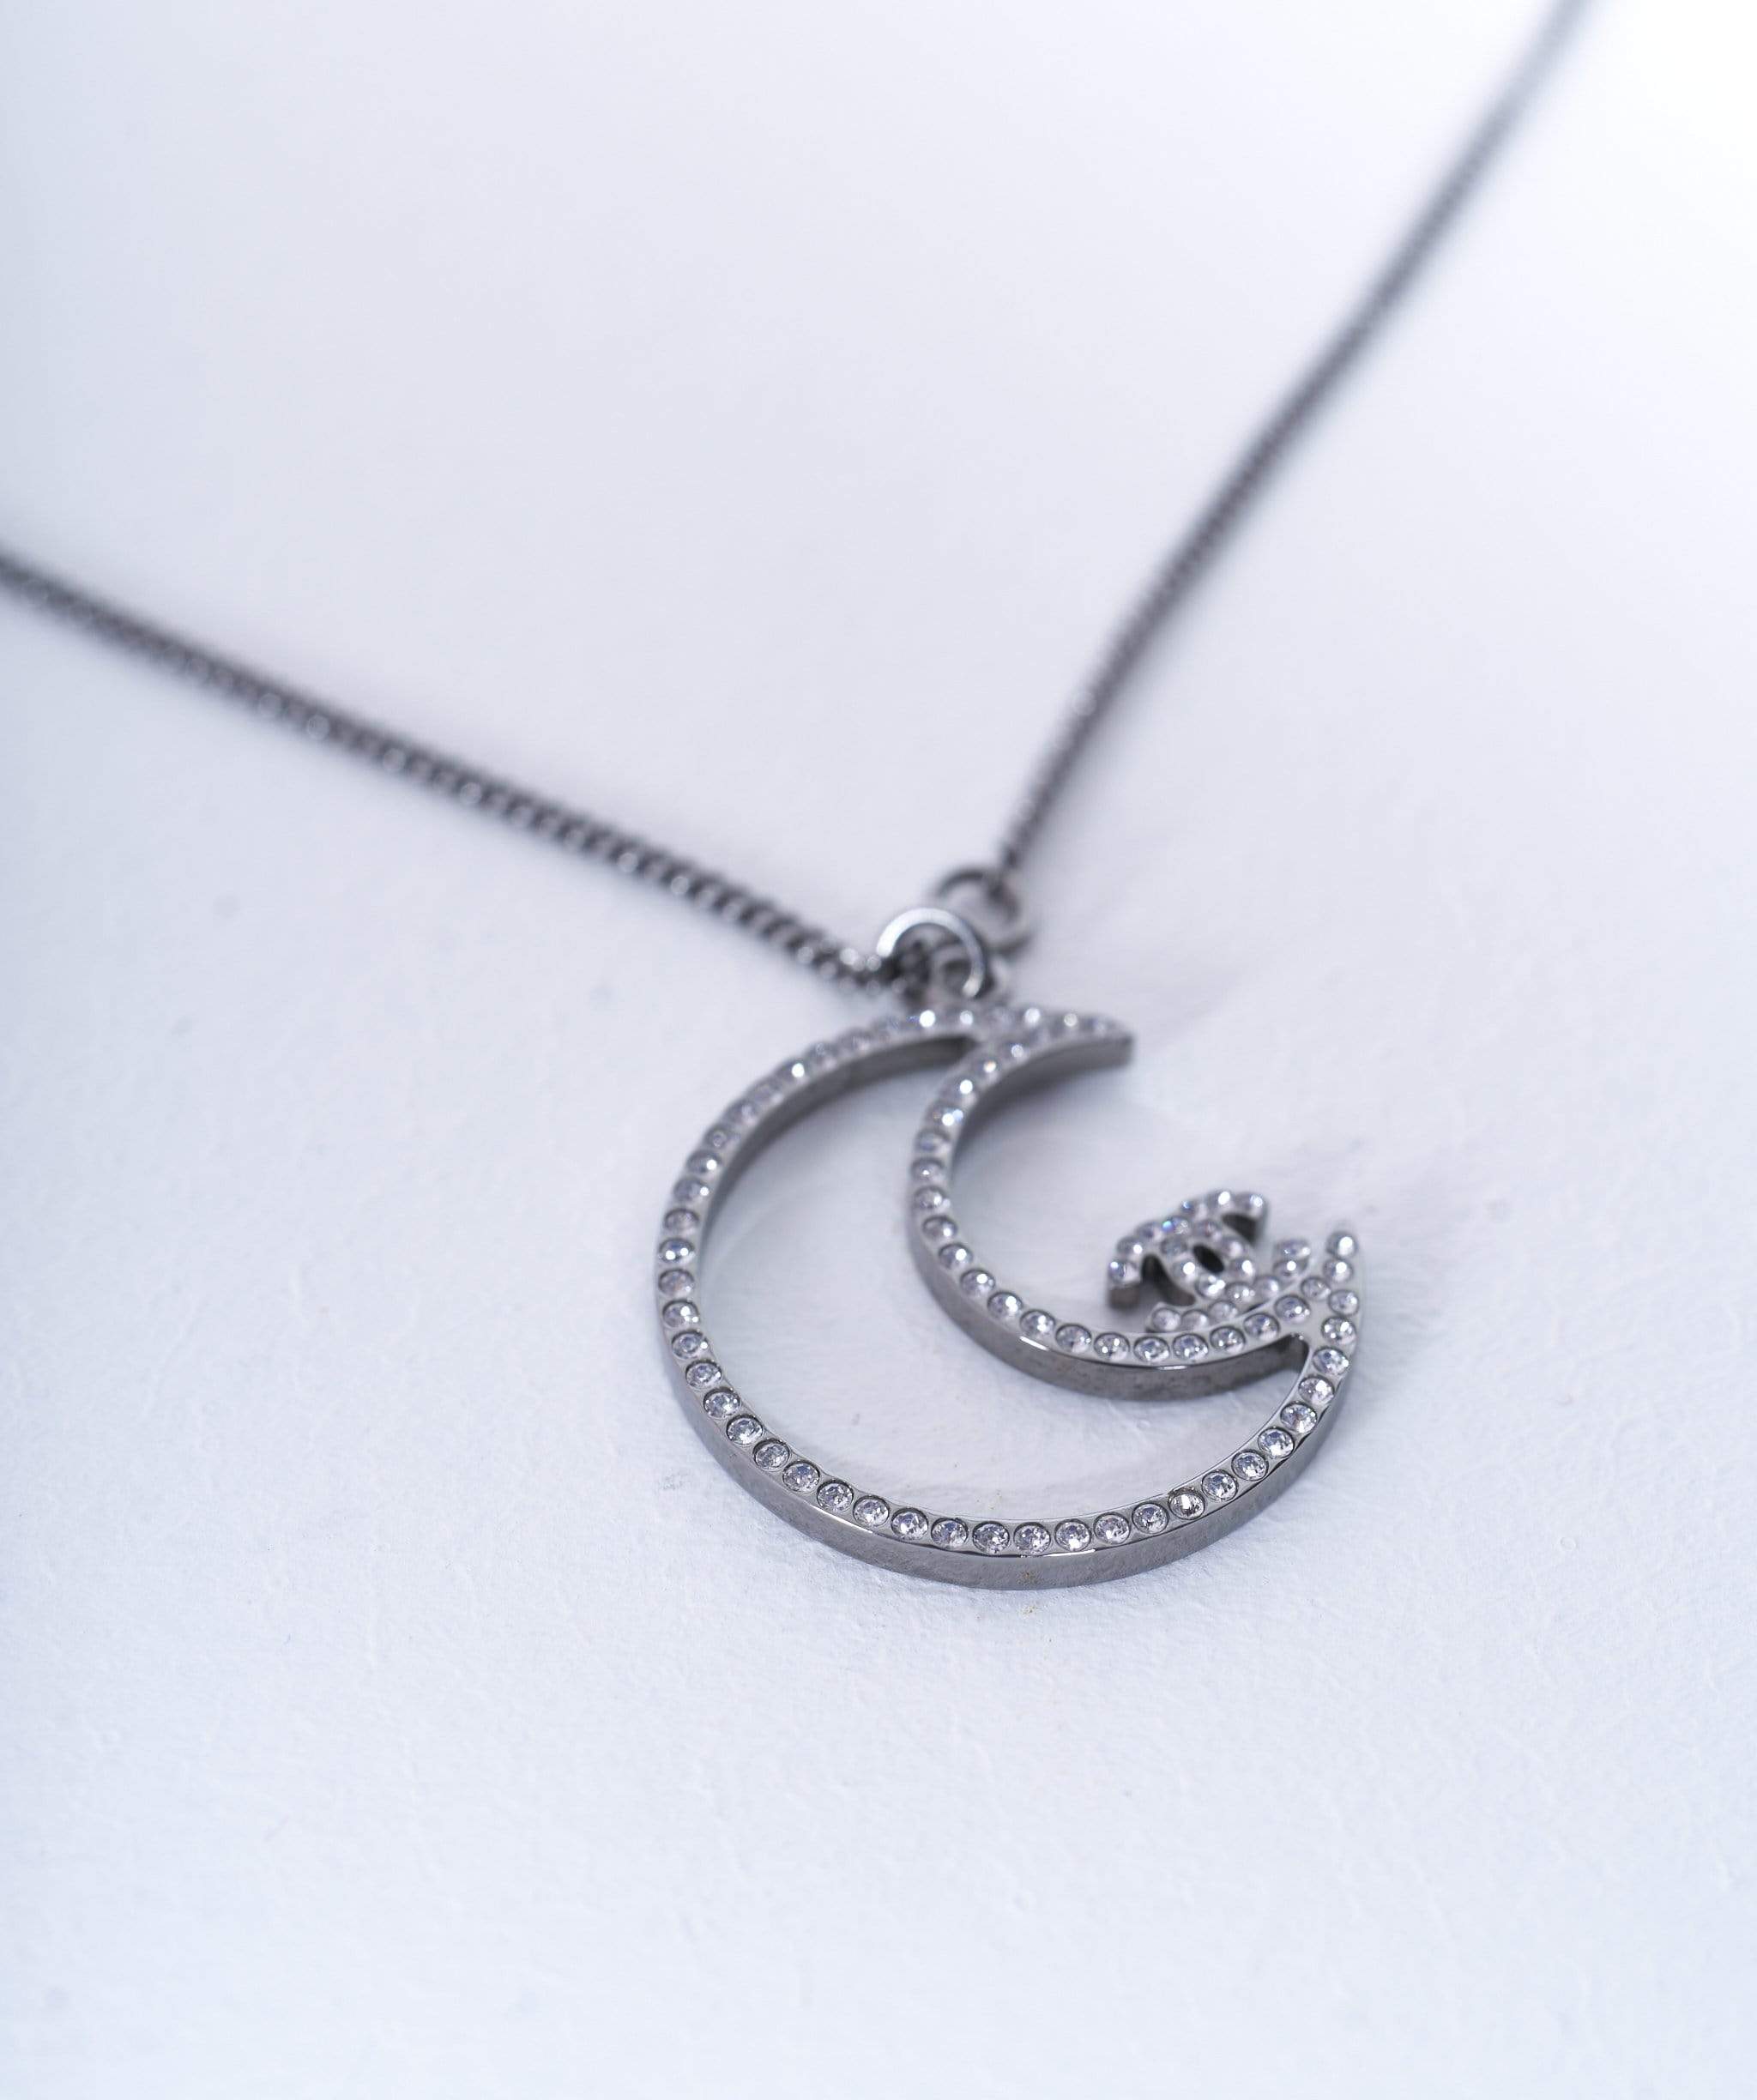 Chanel Chanel Moon Necklace